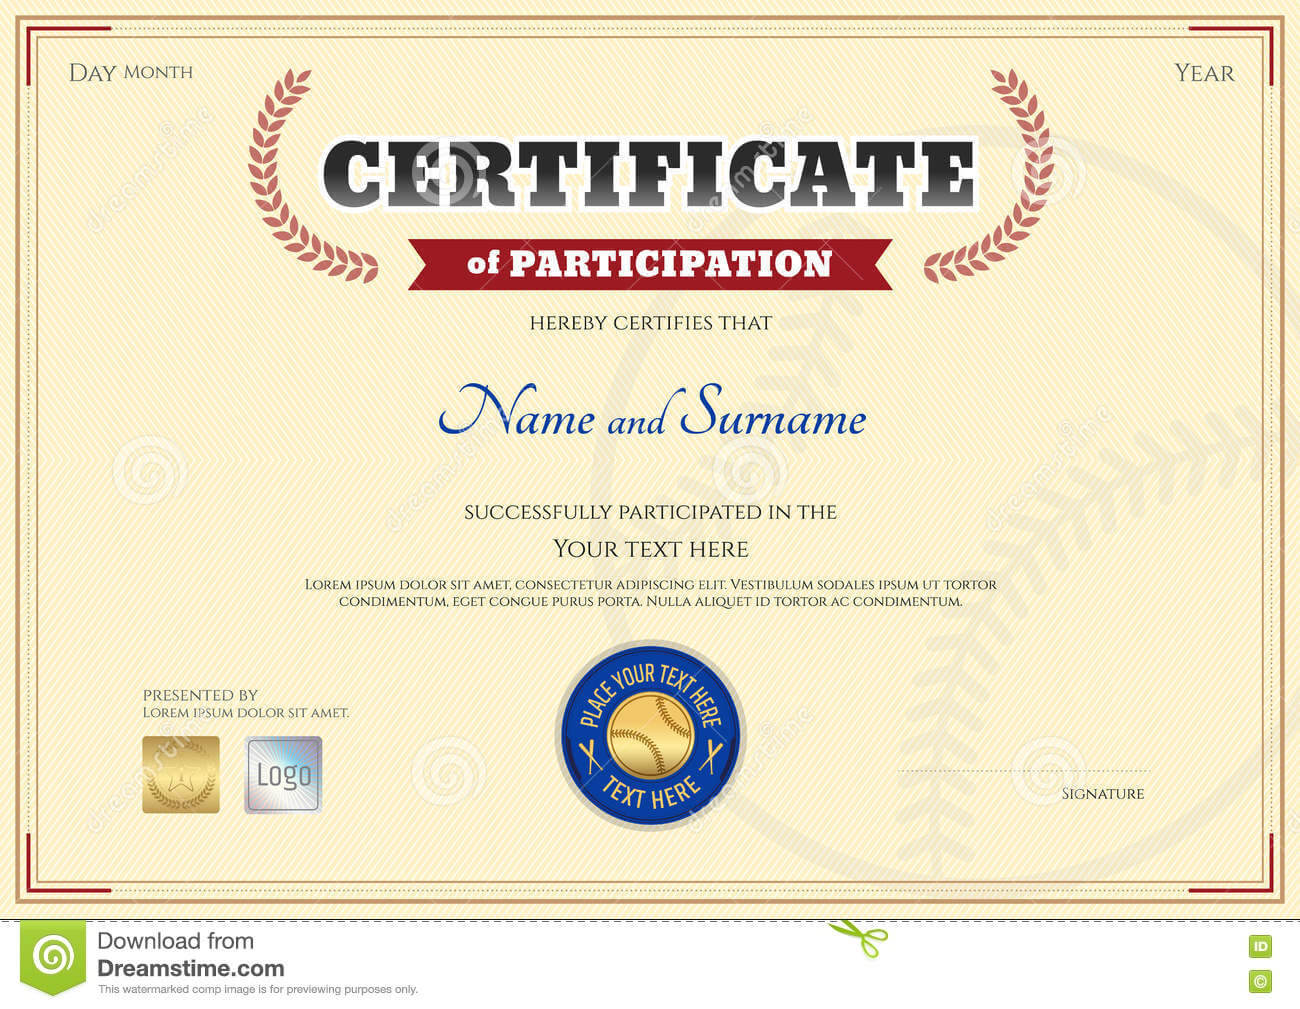 Certificate Of Participation Template In Baseball Sport Pertaining To Certification Of Participation Free Template